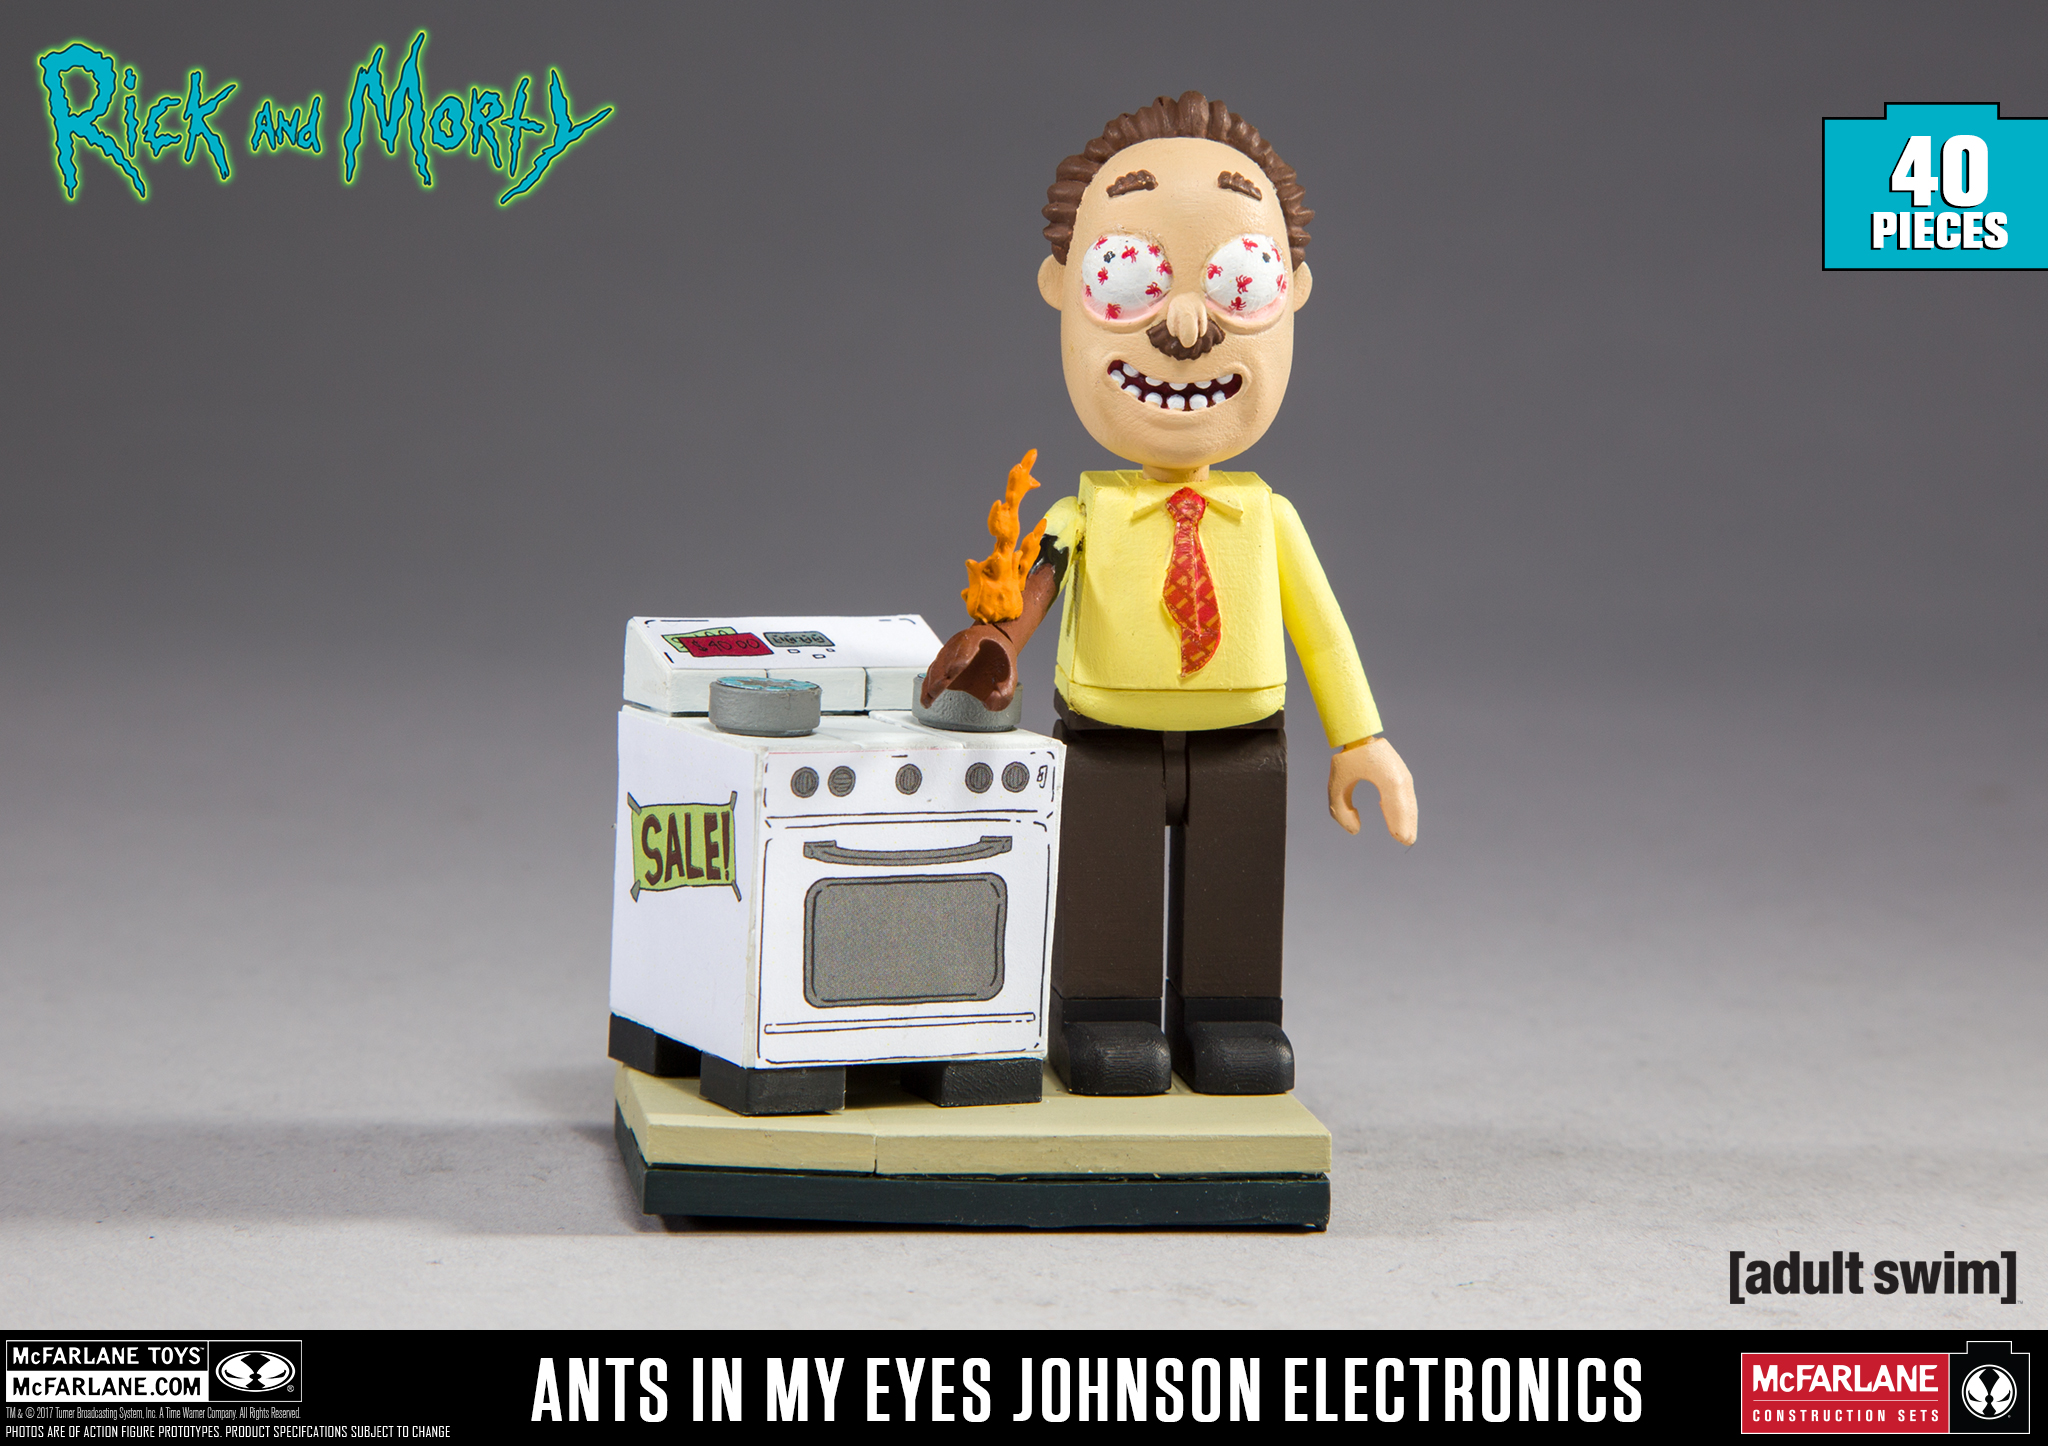 Rick And Morty Ants In My Eyes Johnson Electronics 40 Piece Construction Set 